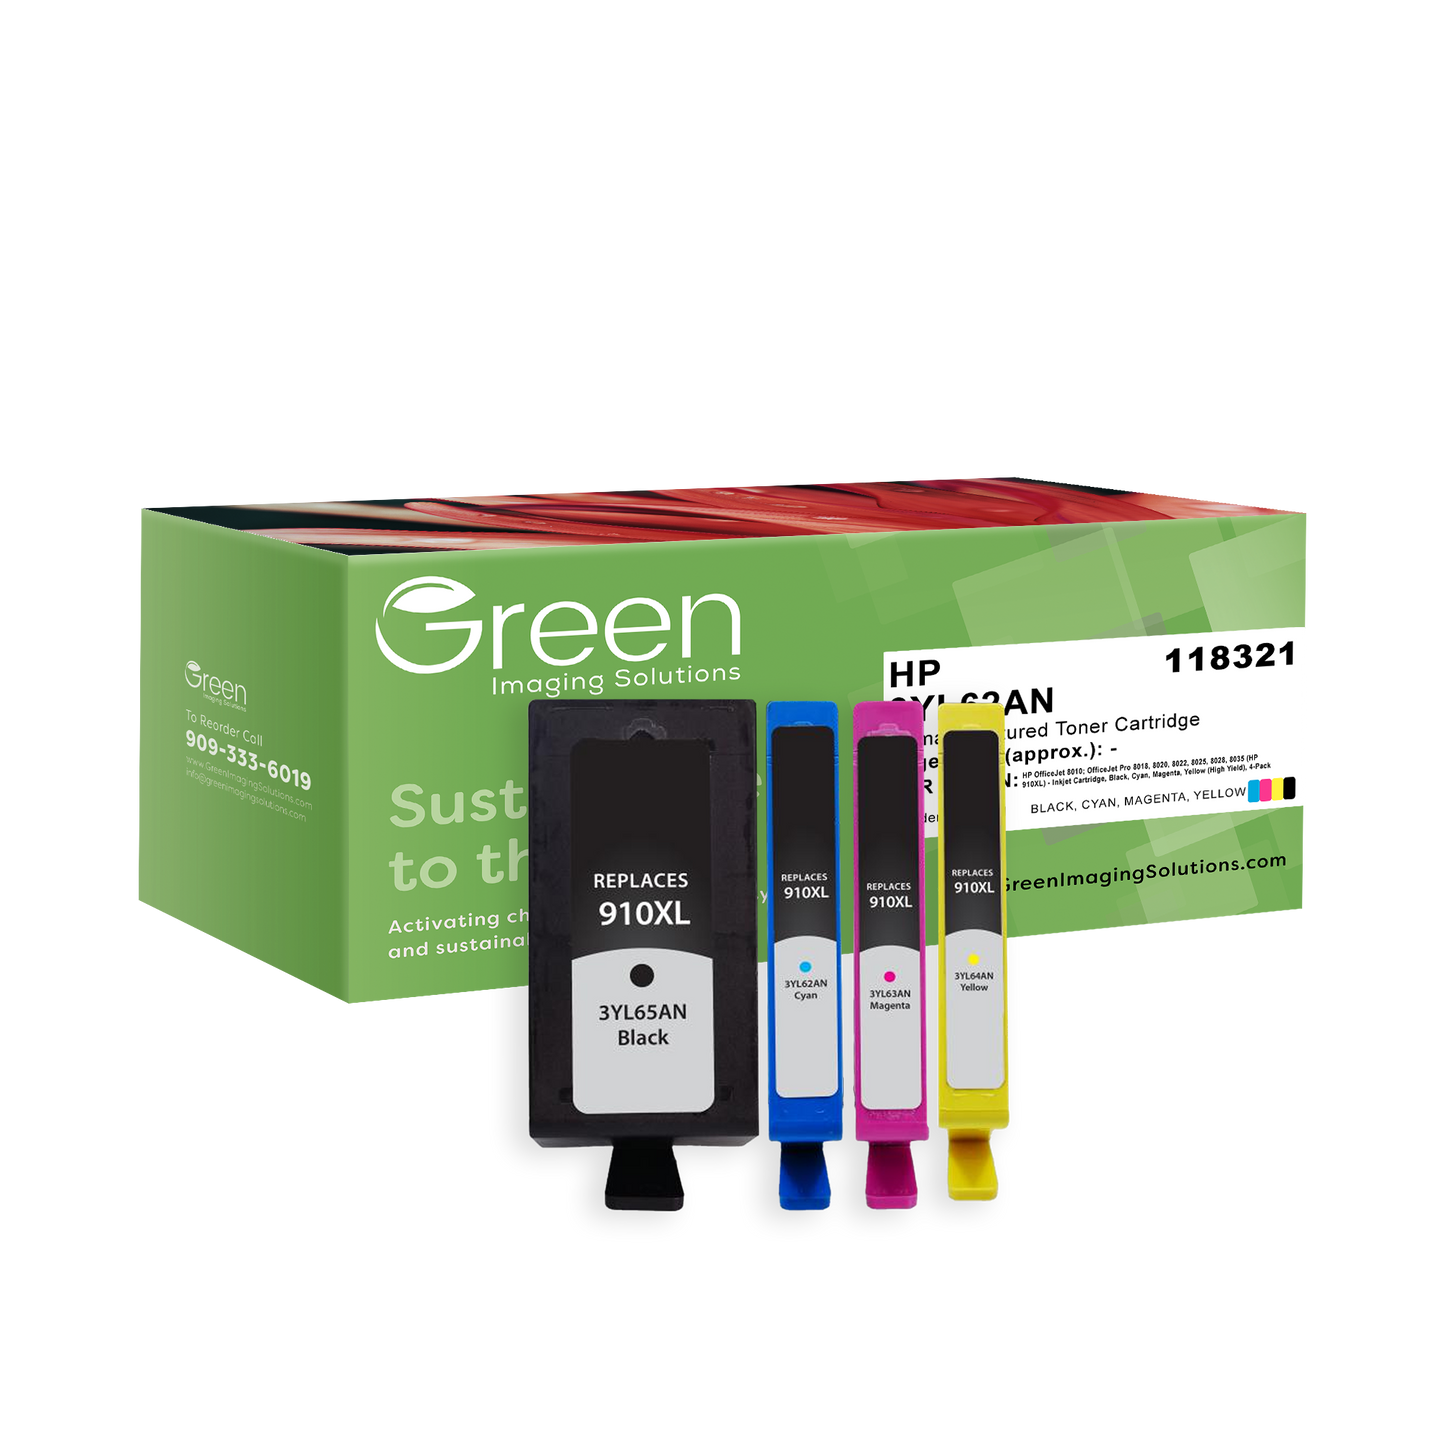 Green Imaging Solutions Remanufactured High Yield Black, Cyan, Magenta, Yellow Ink Cartridges for HP 910XL 4-Pack